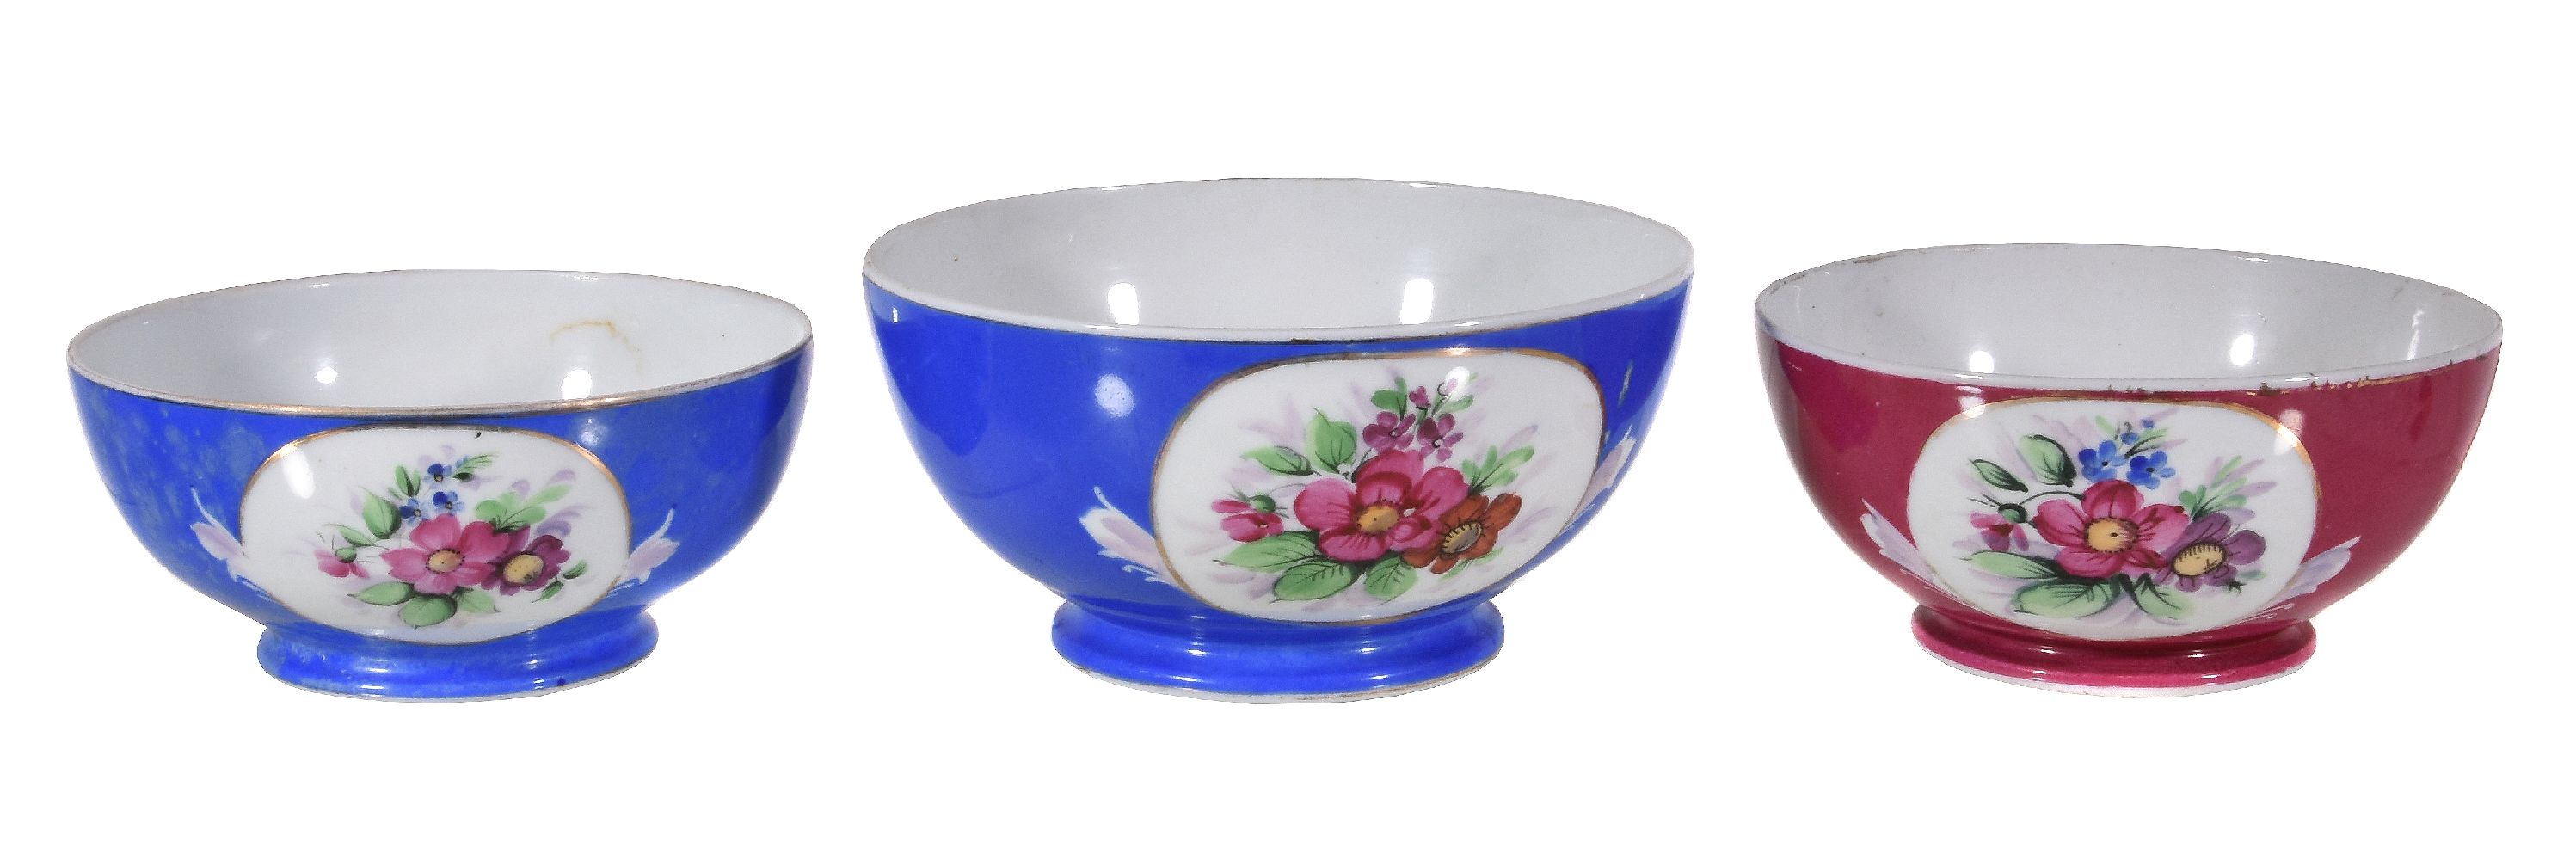 Three Moscow porcelain (Gardner) slop bowls, late 19th century, typically painted with flowers, - Image 2 of 2